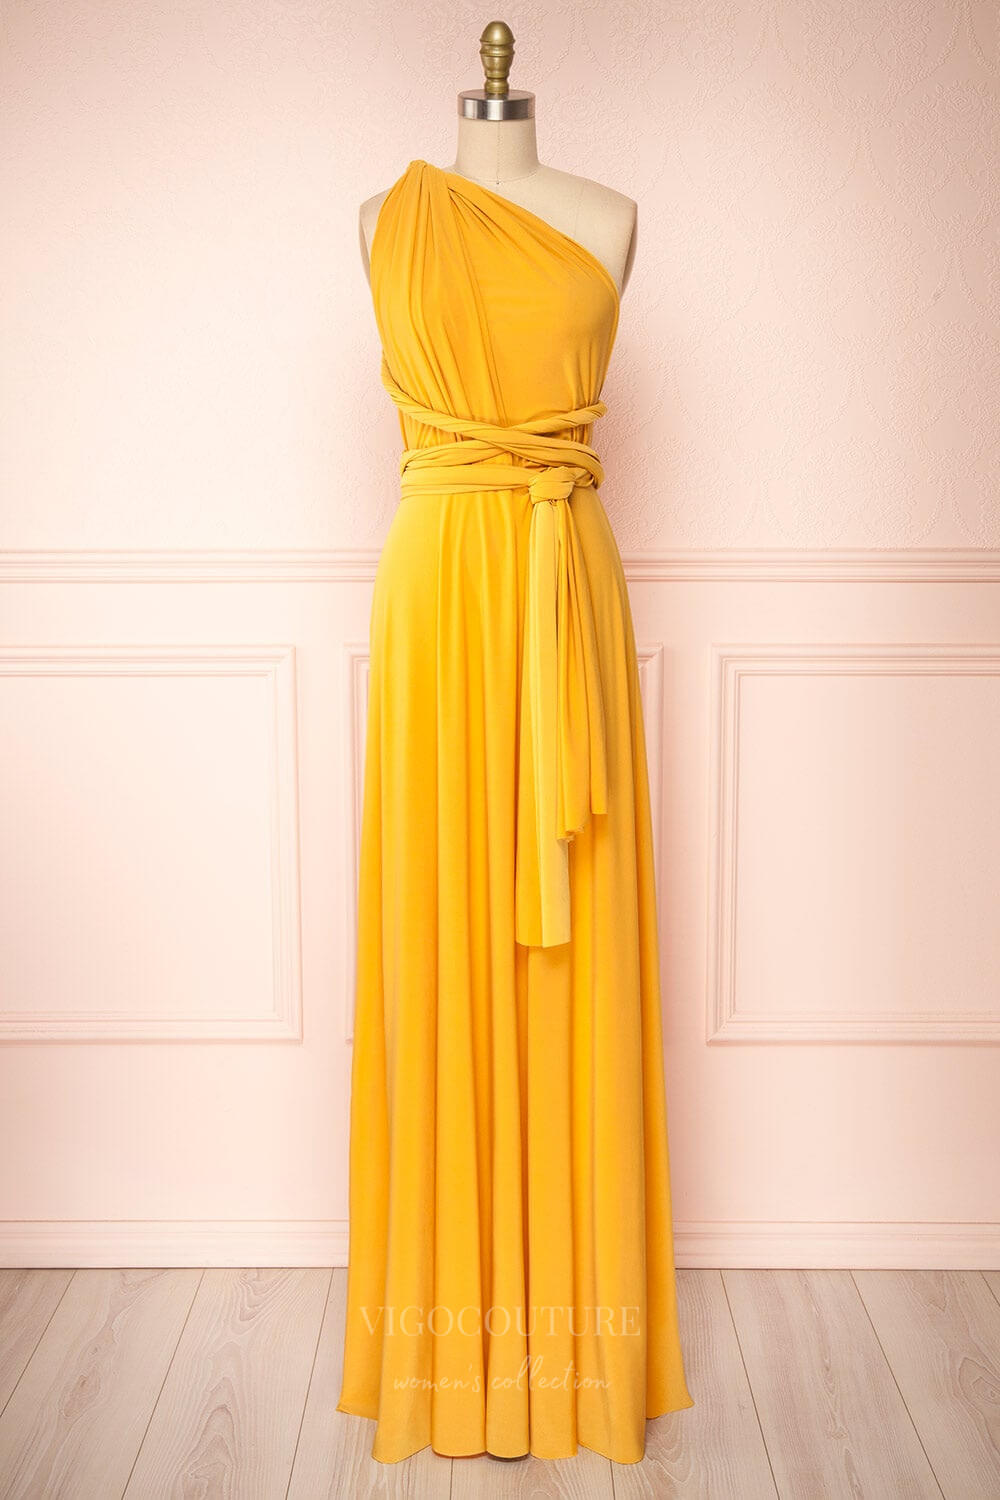 vigocouture-Convertible Bridesmaid Dress Stretchable Woven Dress Pleated Prom Dress Multiway Dress 20860-Yellow-Prom Dresses-vigocouture-Yellow-US2-